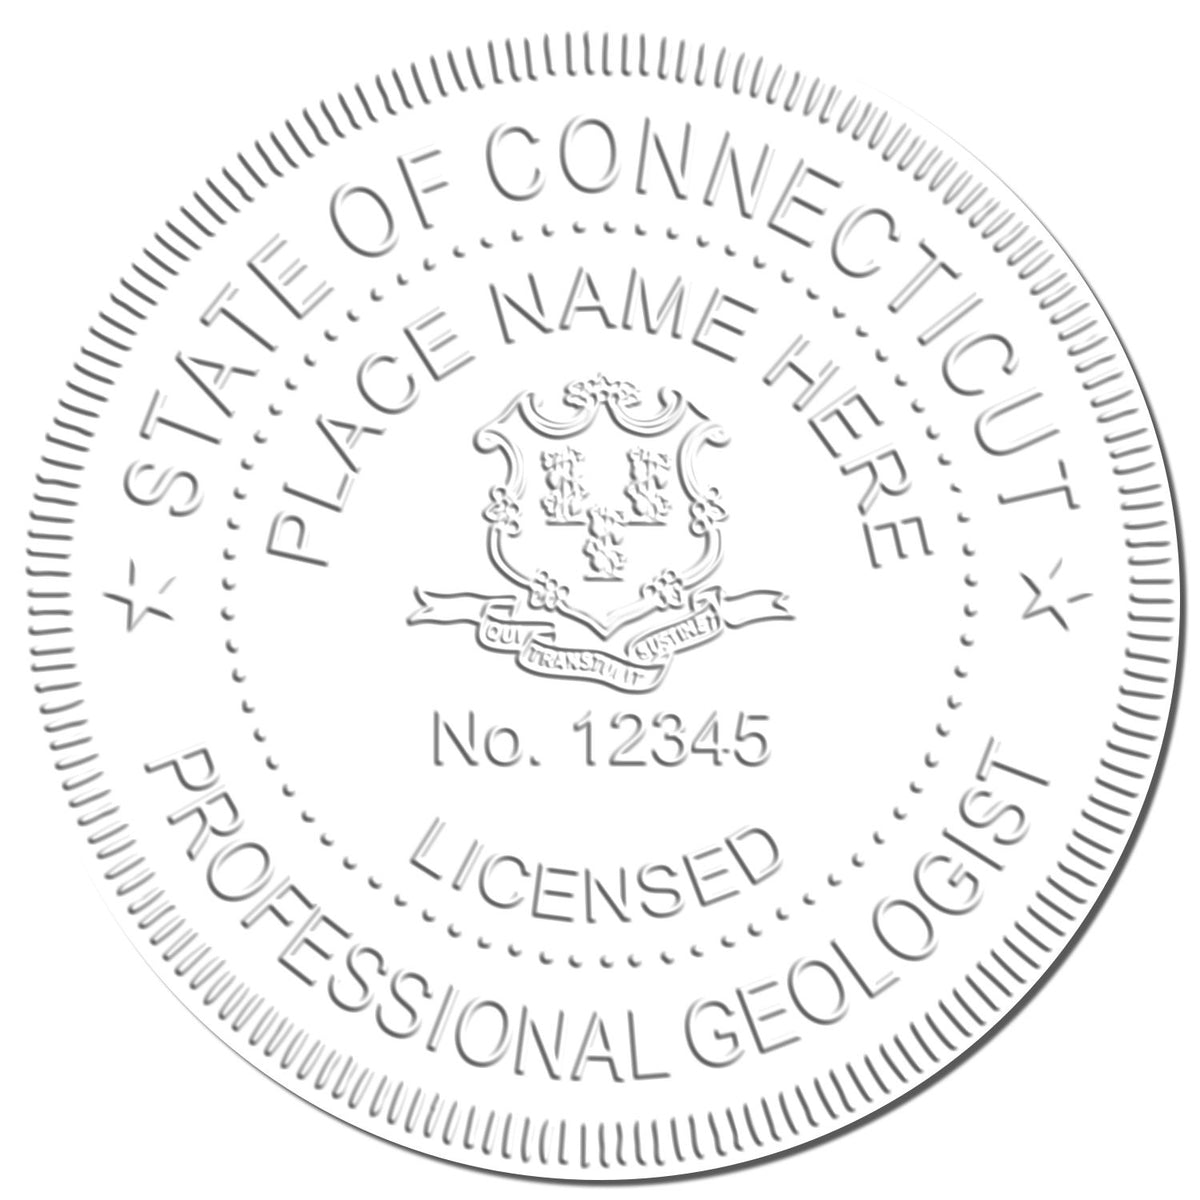 The Connecticut Geologist Desk Seal stamp impression comes to life with a crisp, detailed image stamped on paper - showcasing true professional quality.